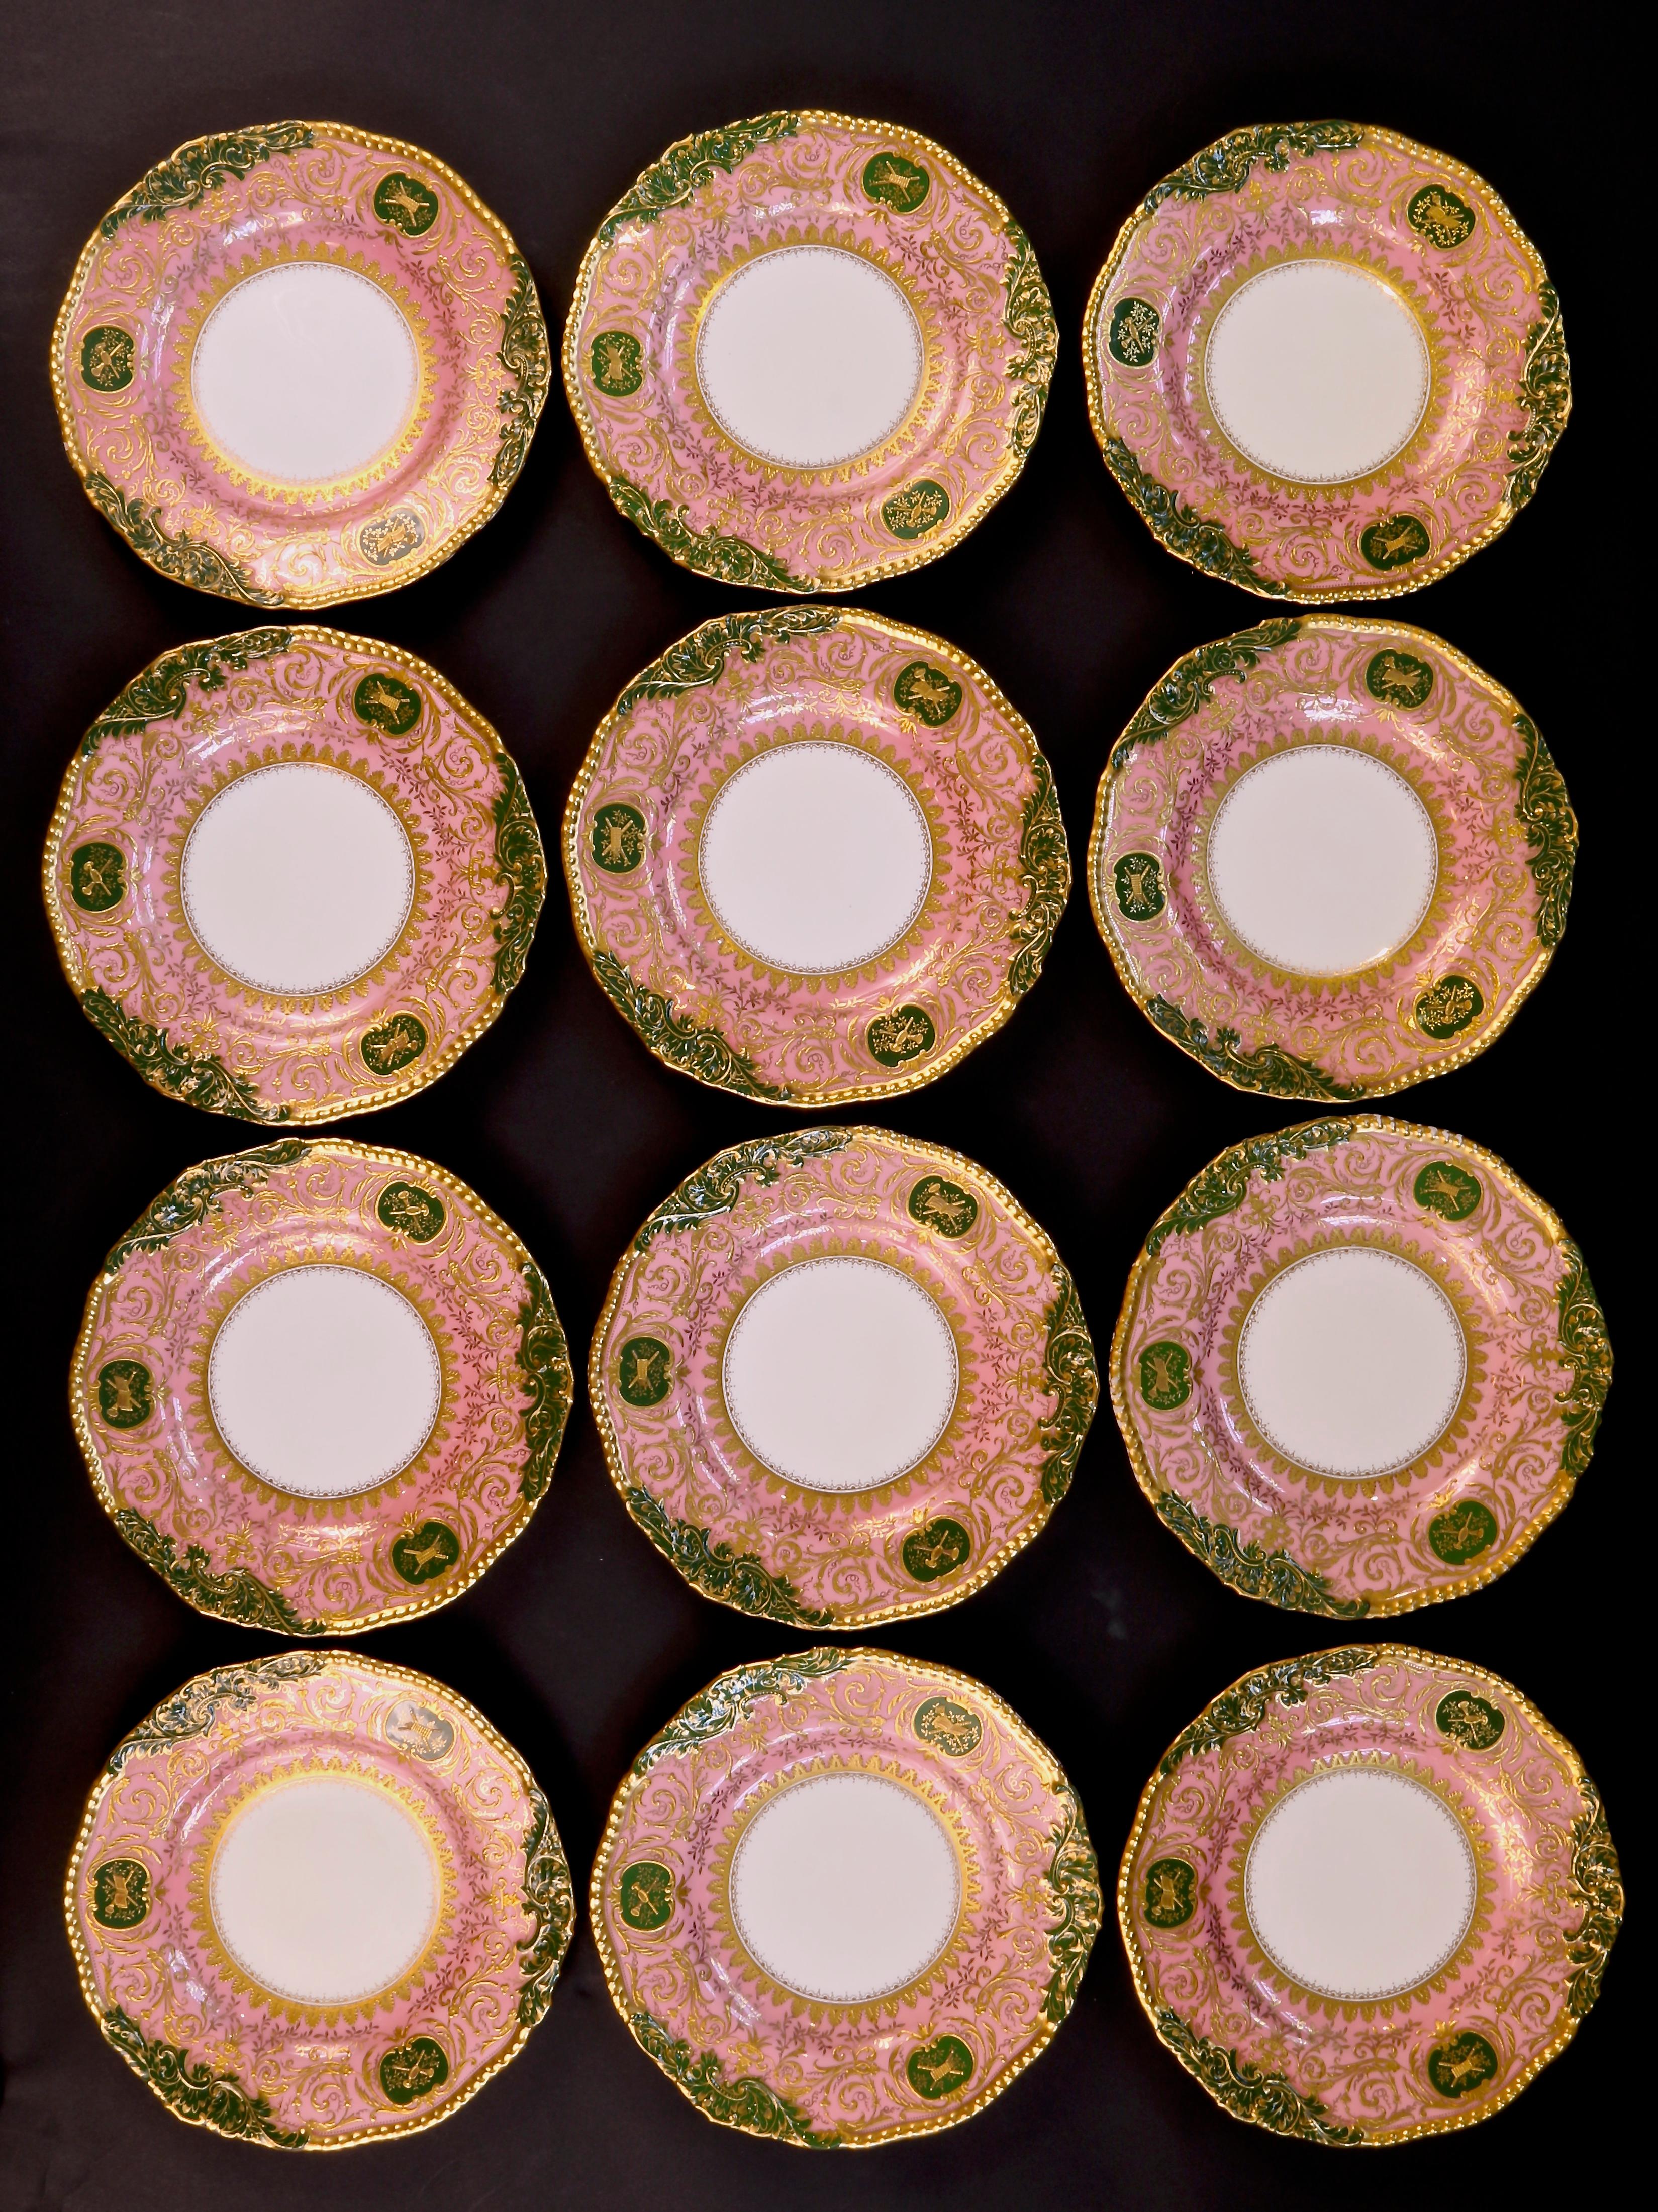 Burnished 12 Coalport Pink and Green Heavily Gilded Plates Featuring Musical Instruments